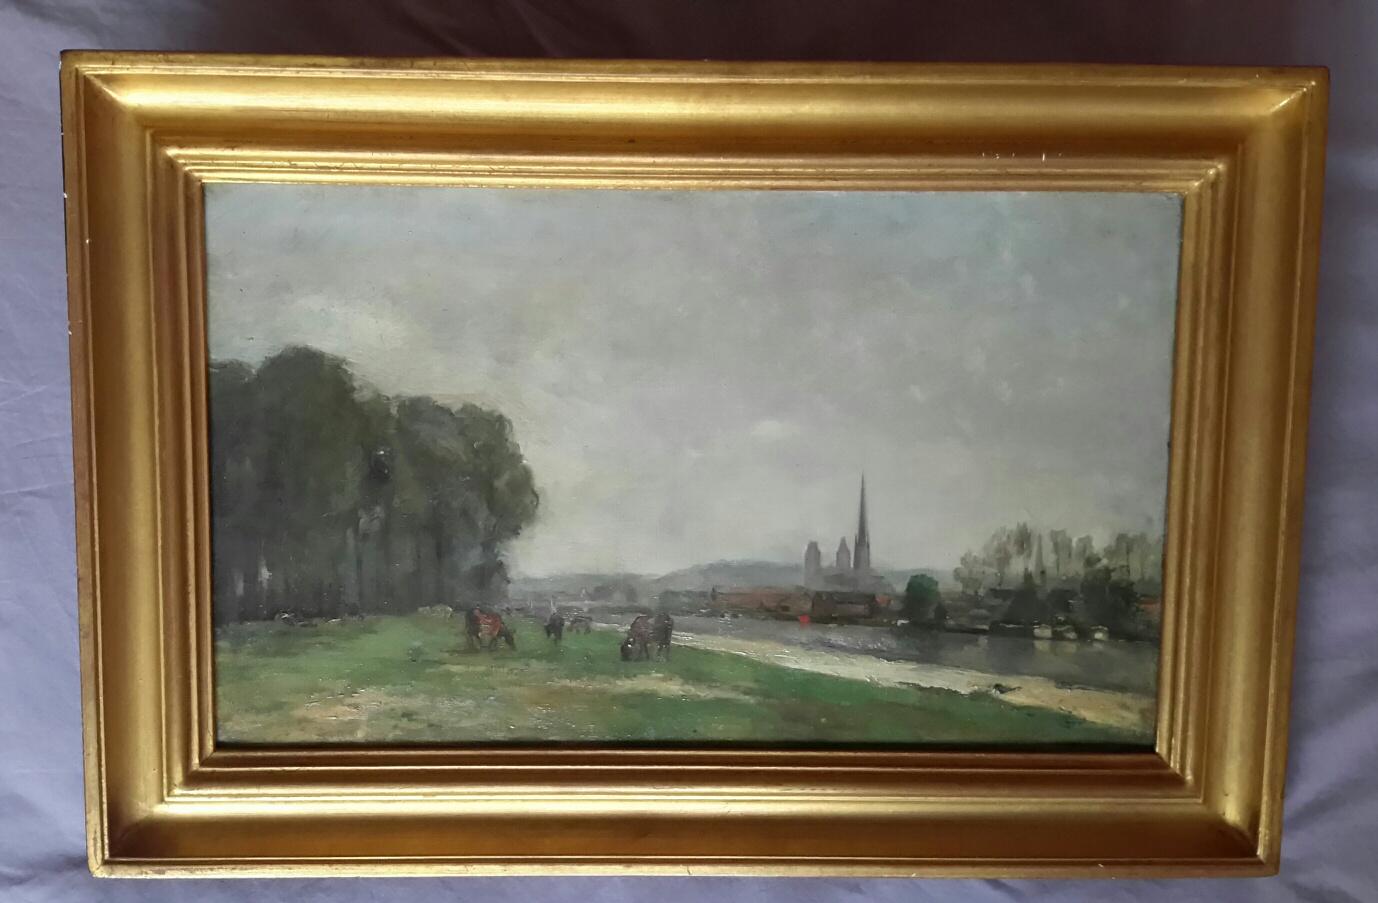  Normandy Rouen Cathedral 19th Century Landscape - Gray Landscape Painting by Langlois